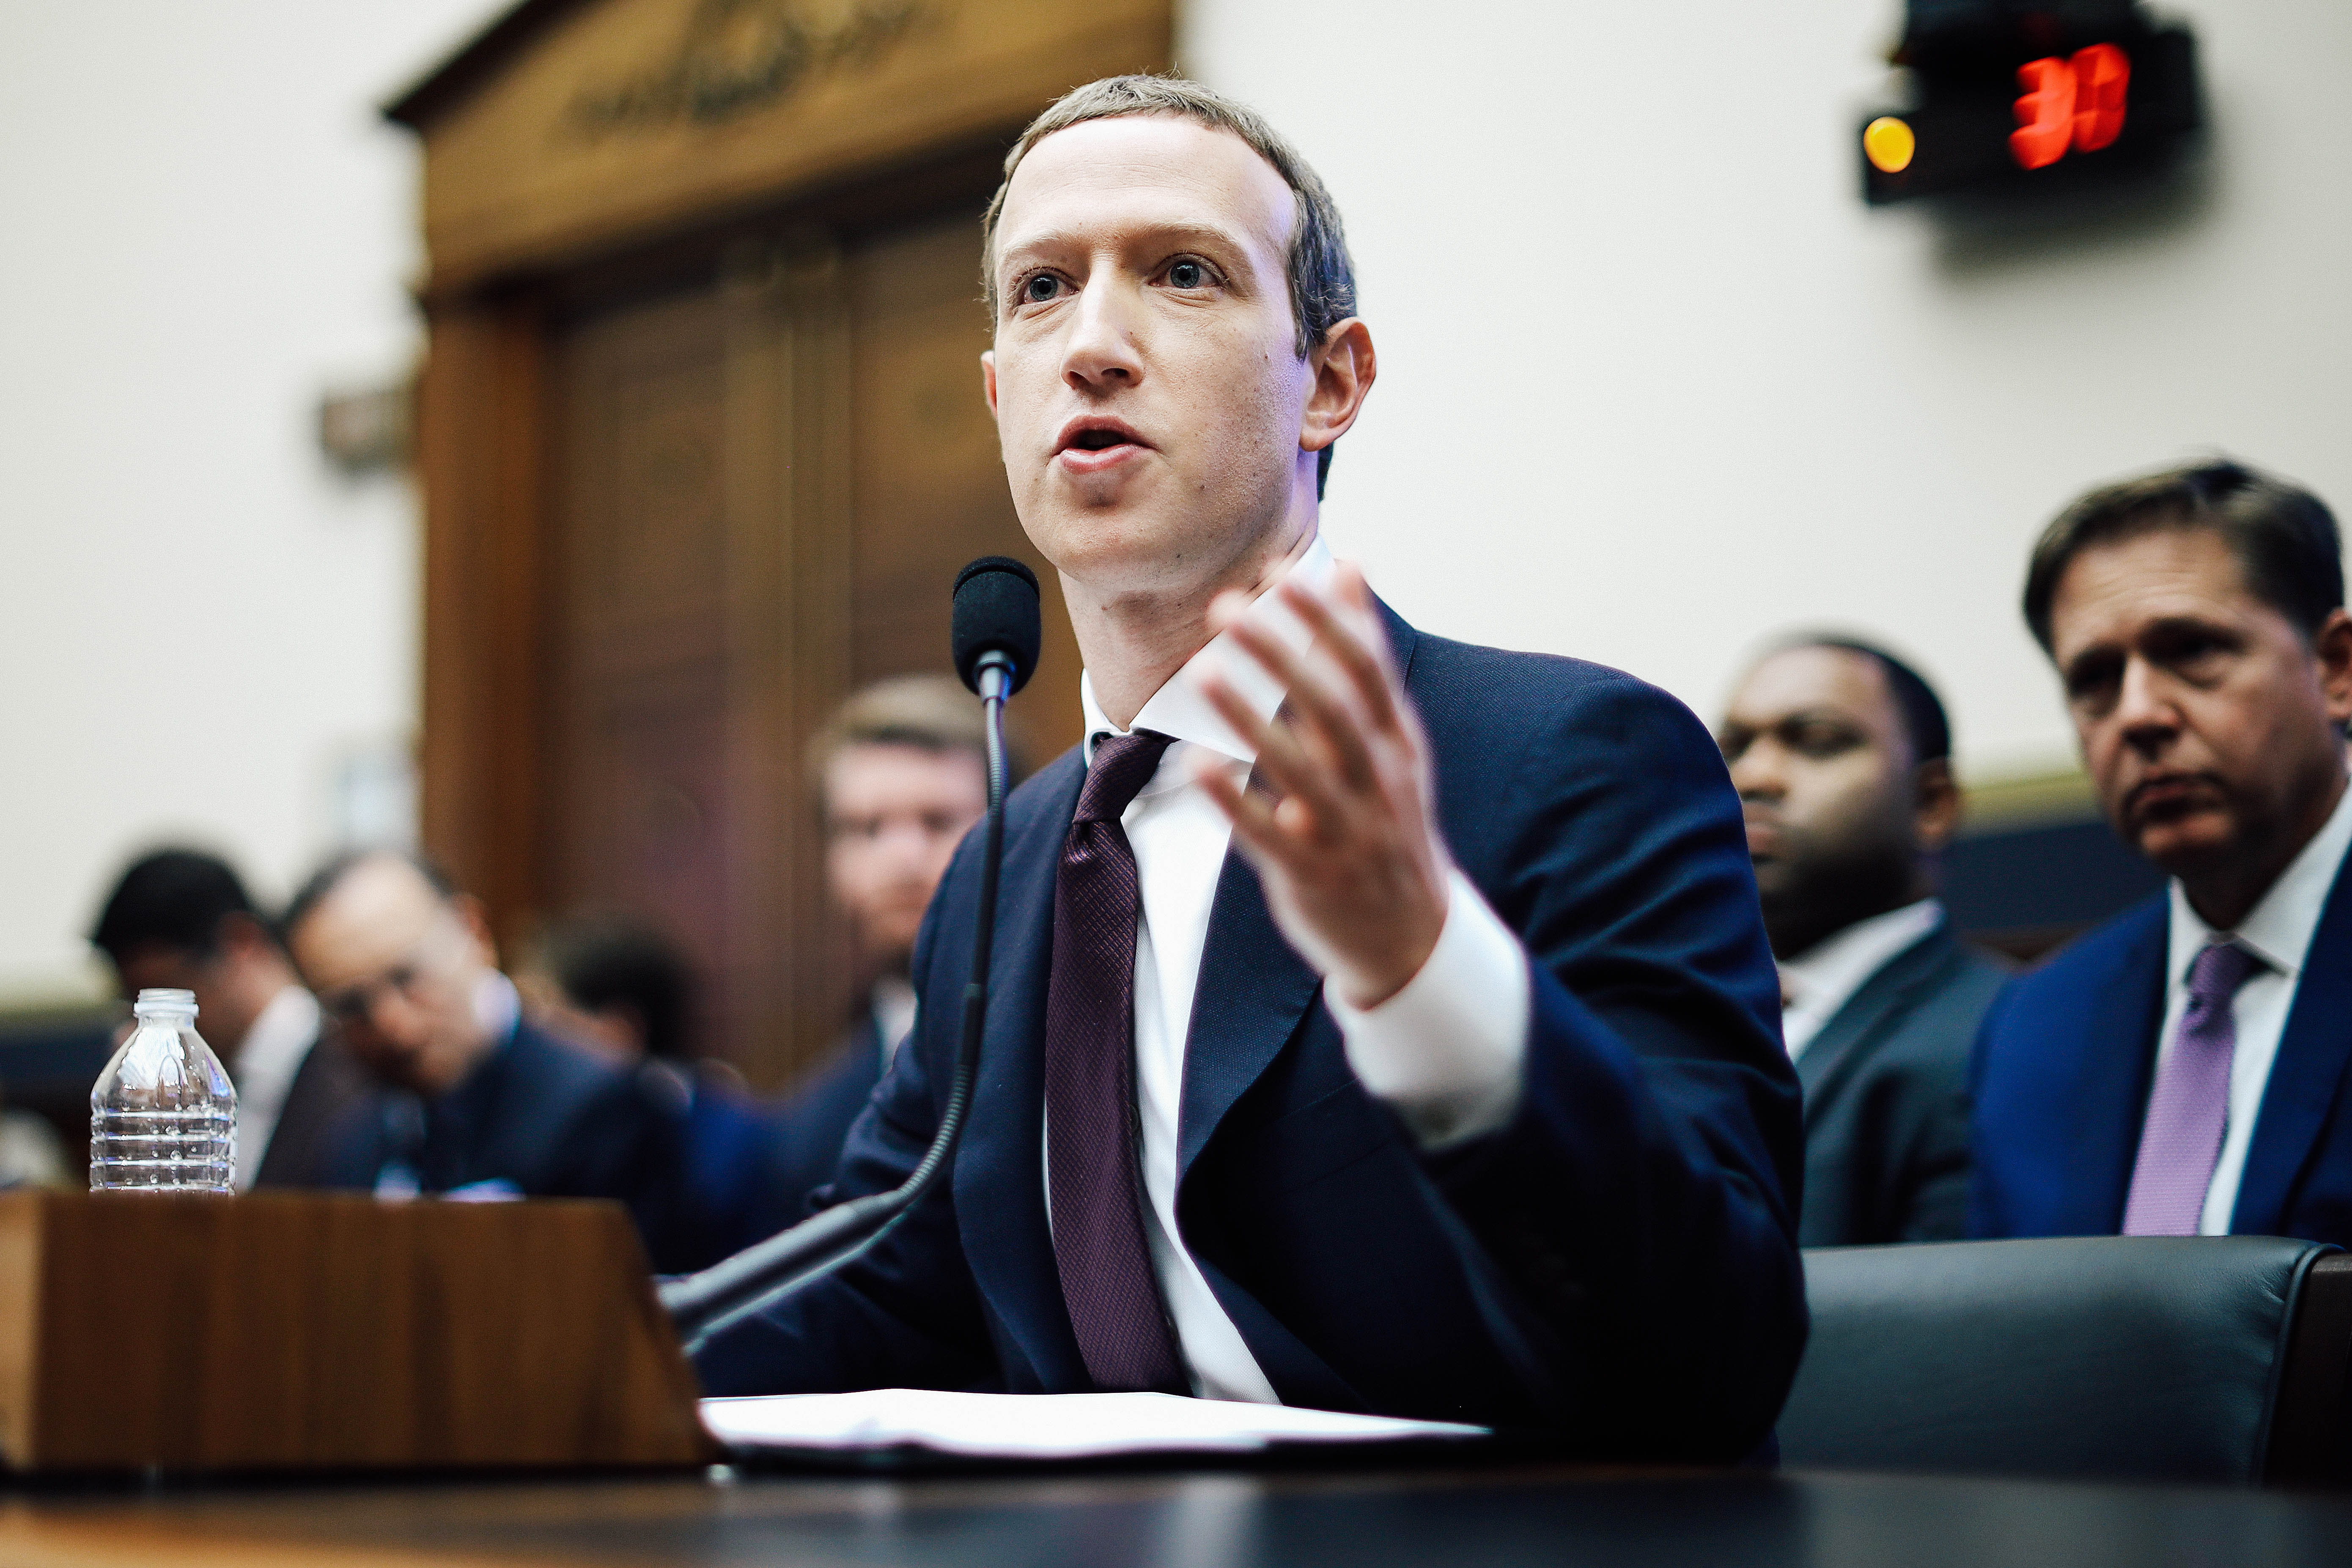 Mark Zuckerberg testifies before the House Financial Services Committee in Washington on Oct. 23.